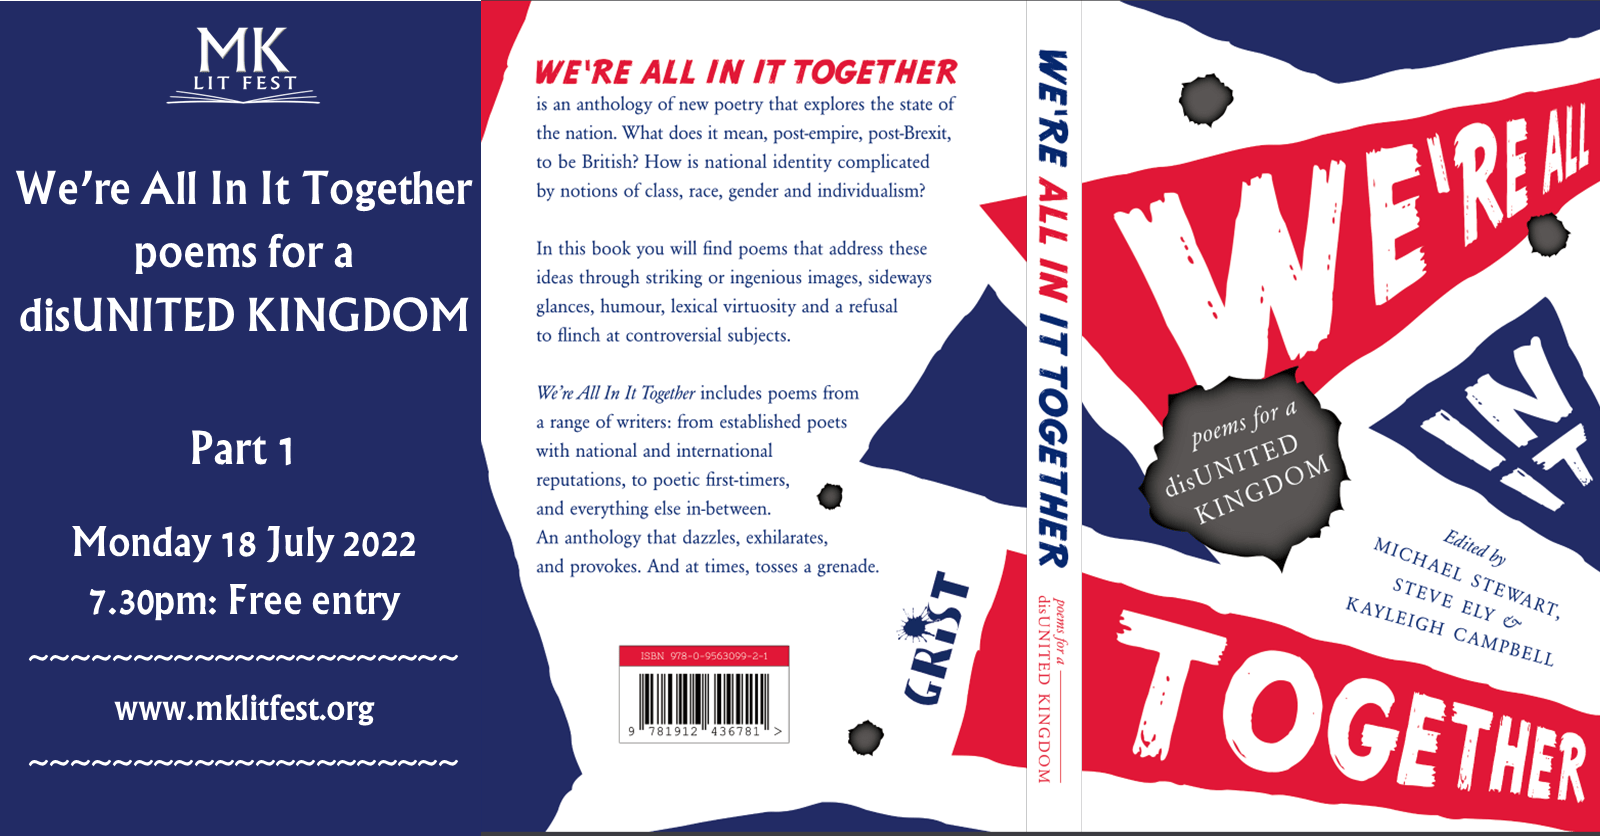 We’re All In It Together: poems for a disUNITED KINGDOM (Part 1)